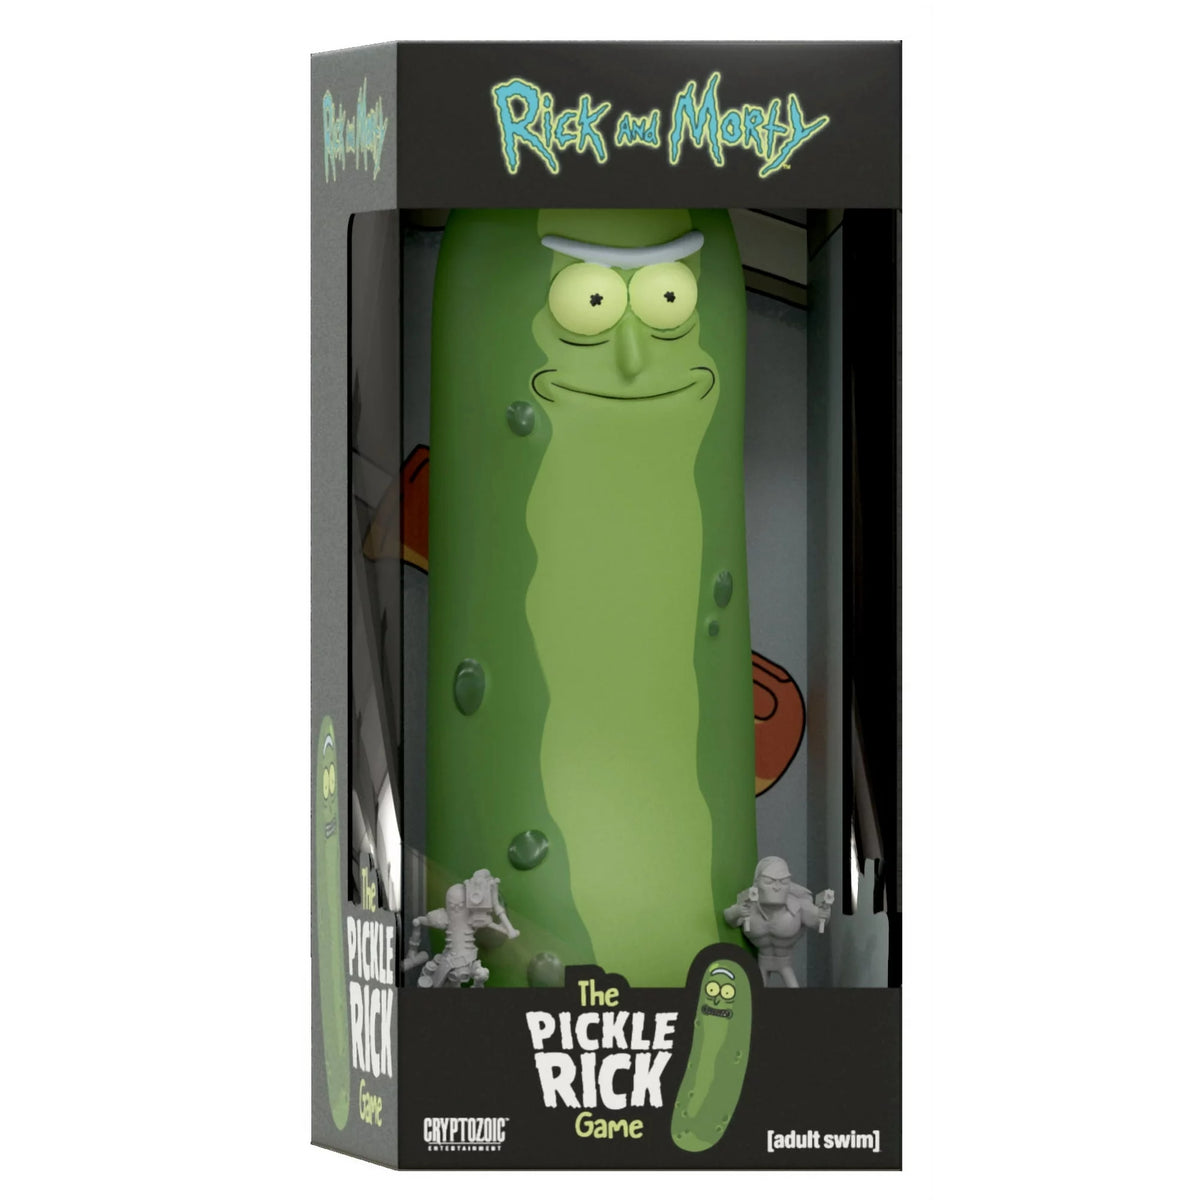 Rick and Morty the Pickle Rick Game